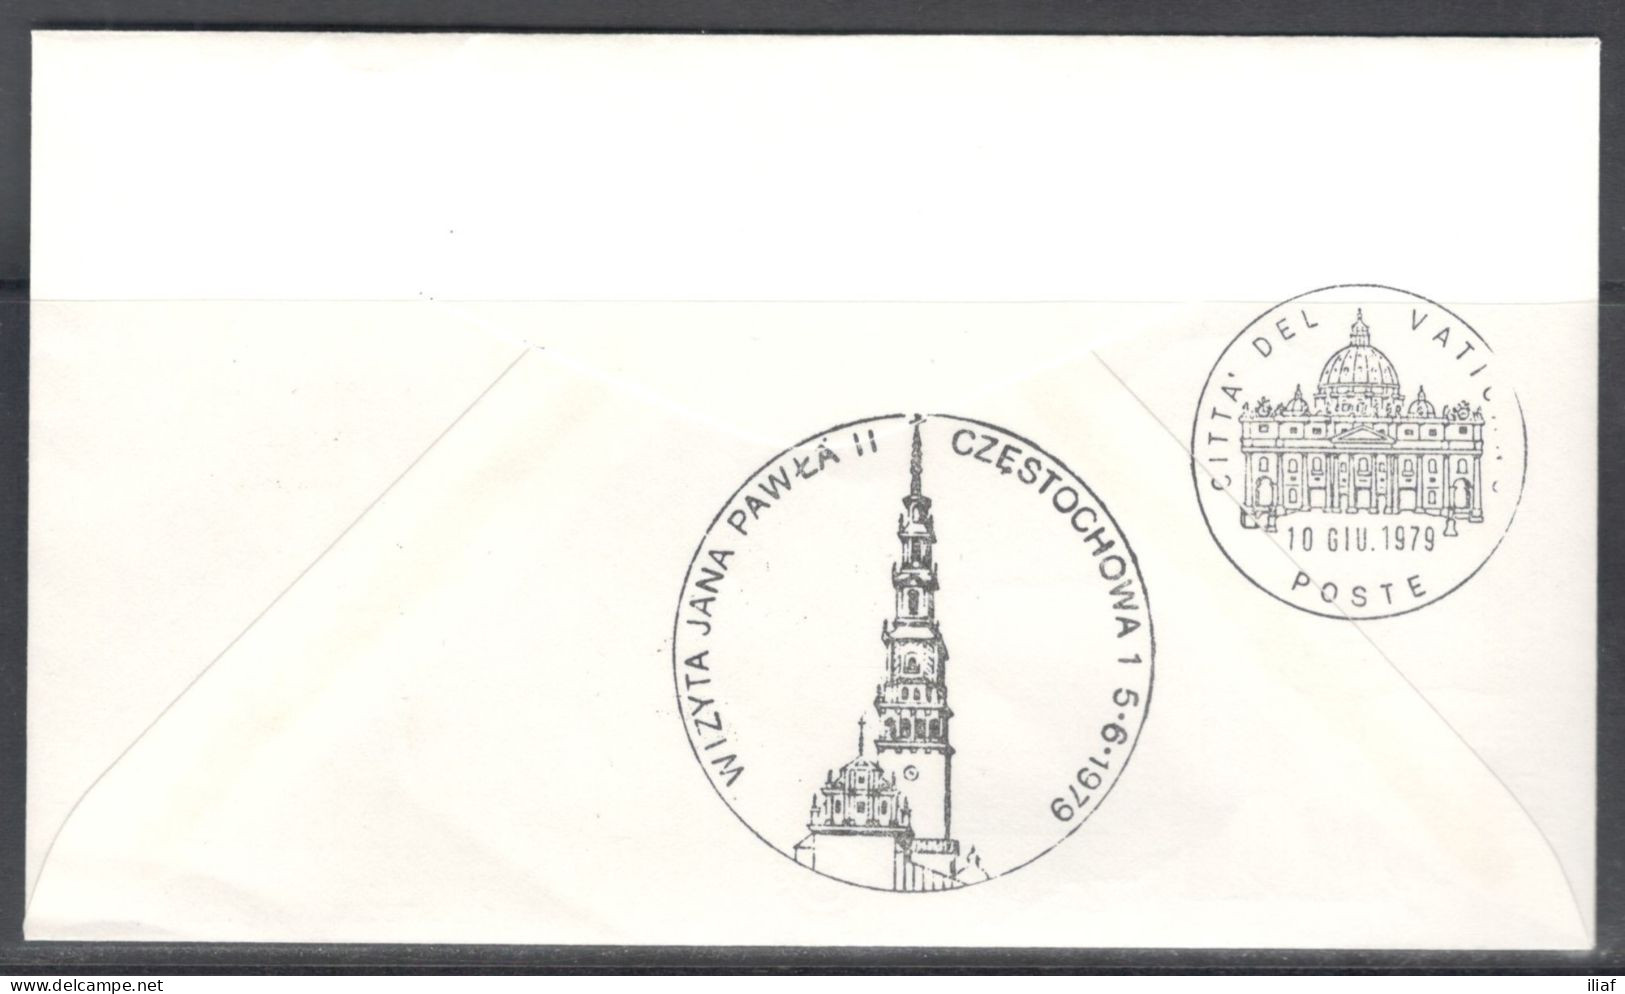 Vatican City.   The Visit Of Pope John Paul II To Poland, Czestochowa.  Special Cancellation On Special Souvenir Cover. - Briefe U. Dokumente